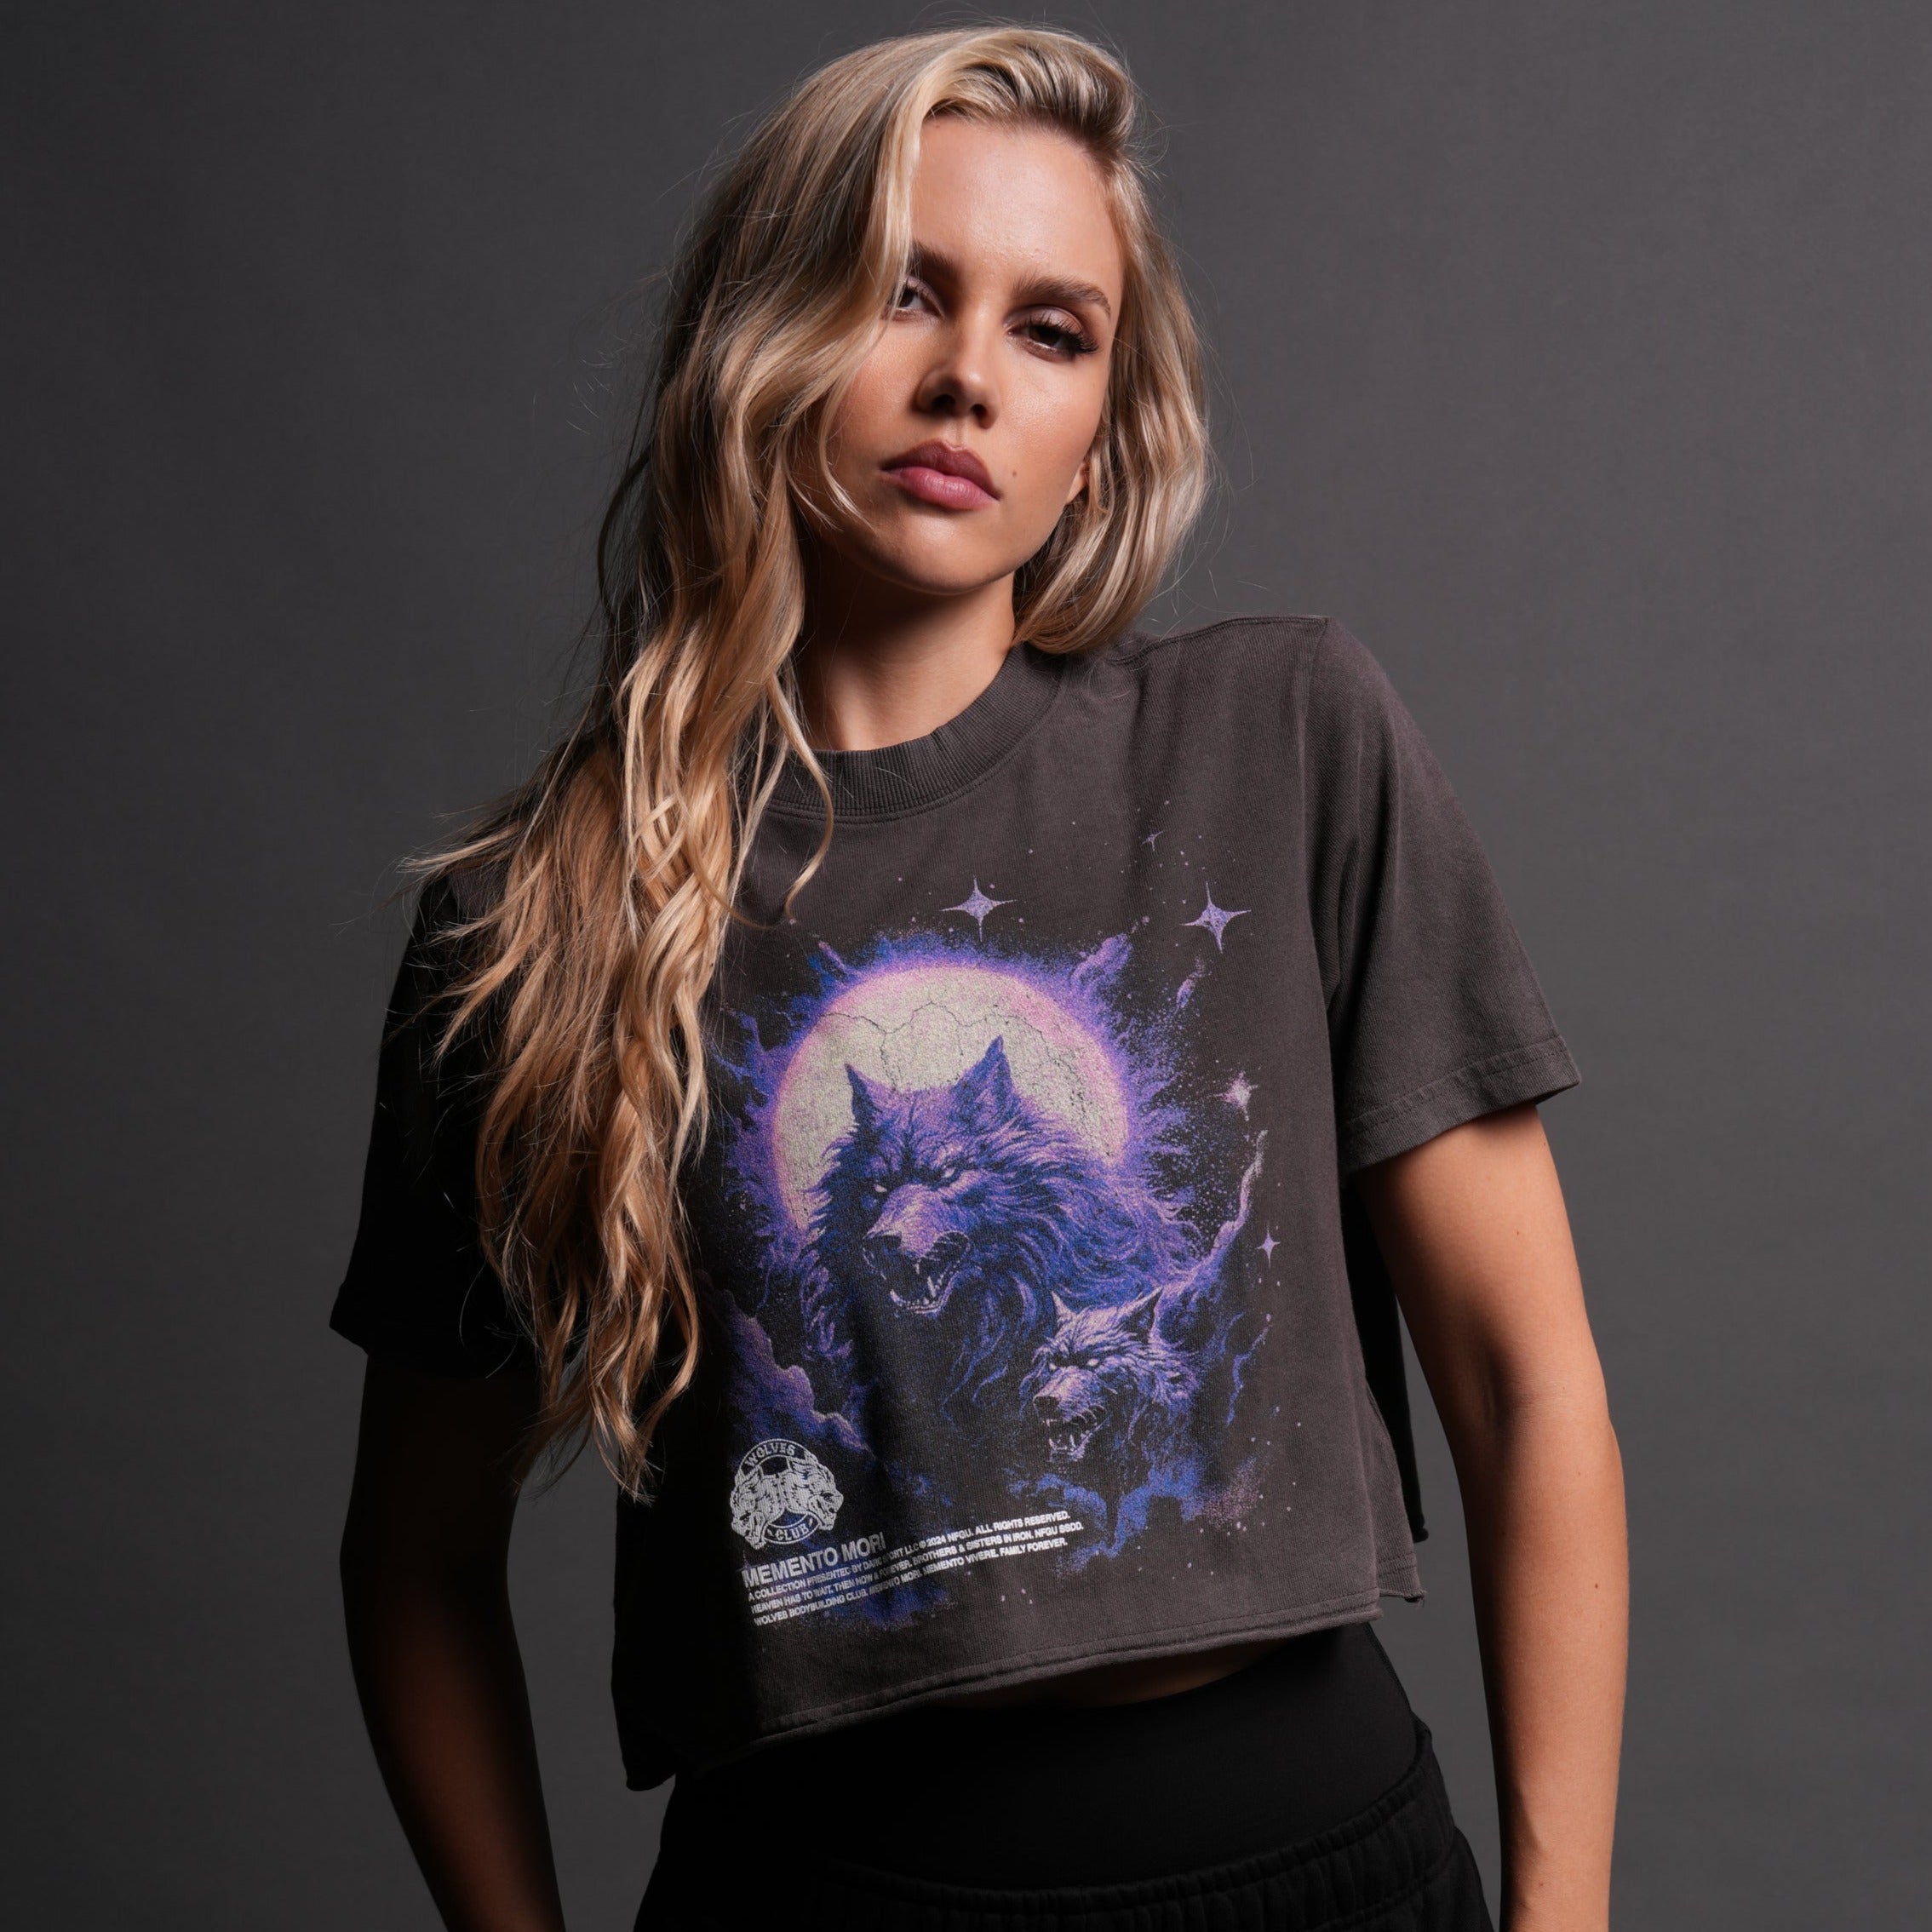 Howling At The Moon "Premium Vintage" (Cropped) Tee in Wolf Gray